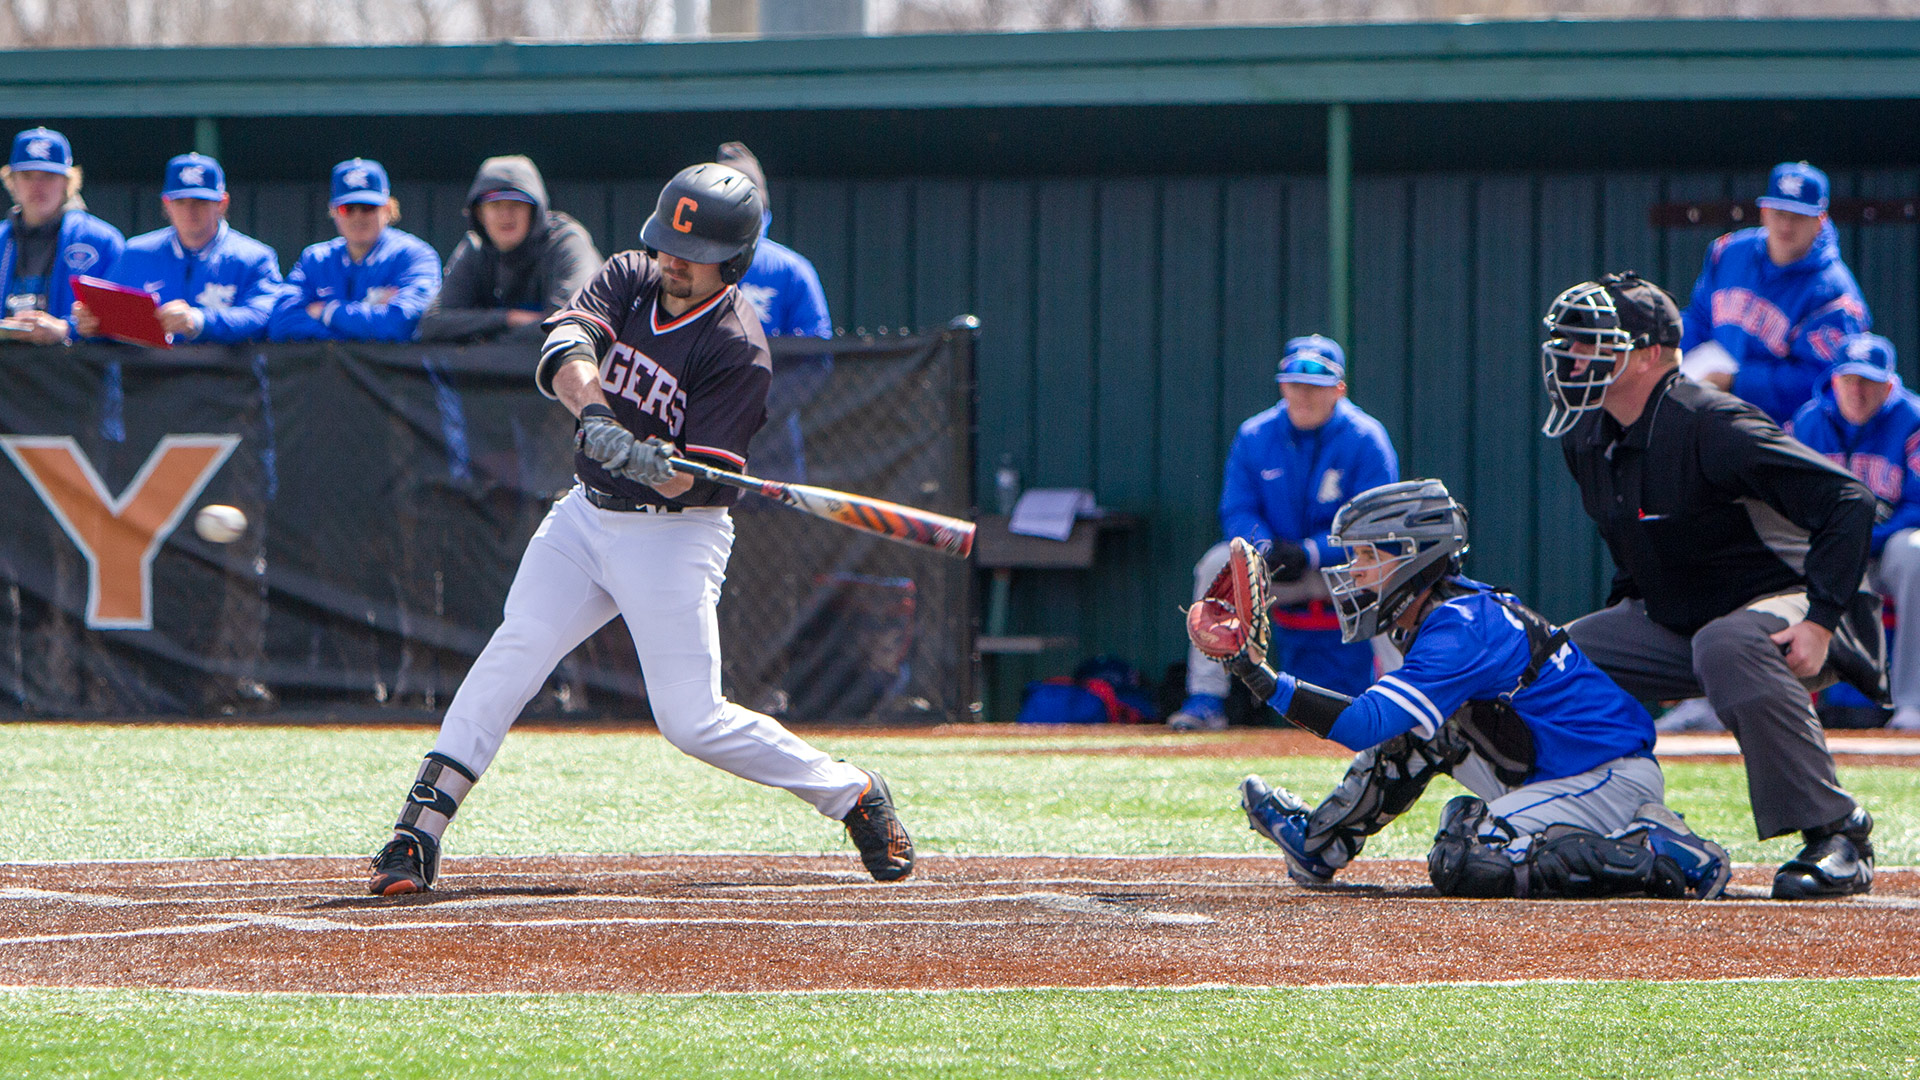 Tigers sweep home games against KCK, take three of four in the series